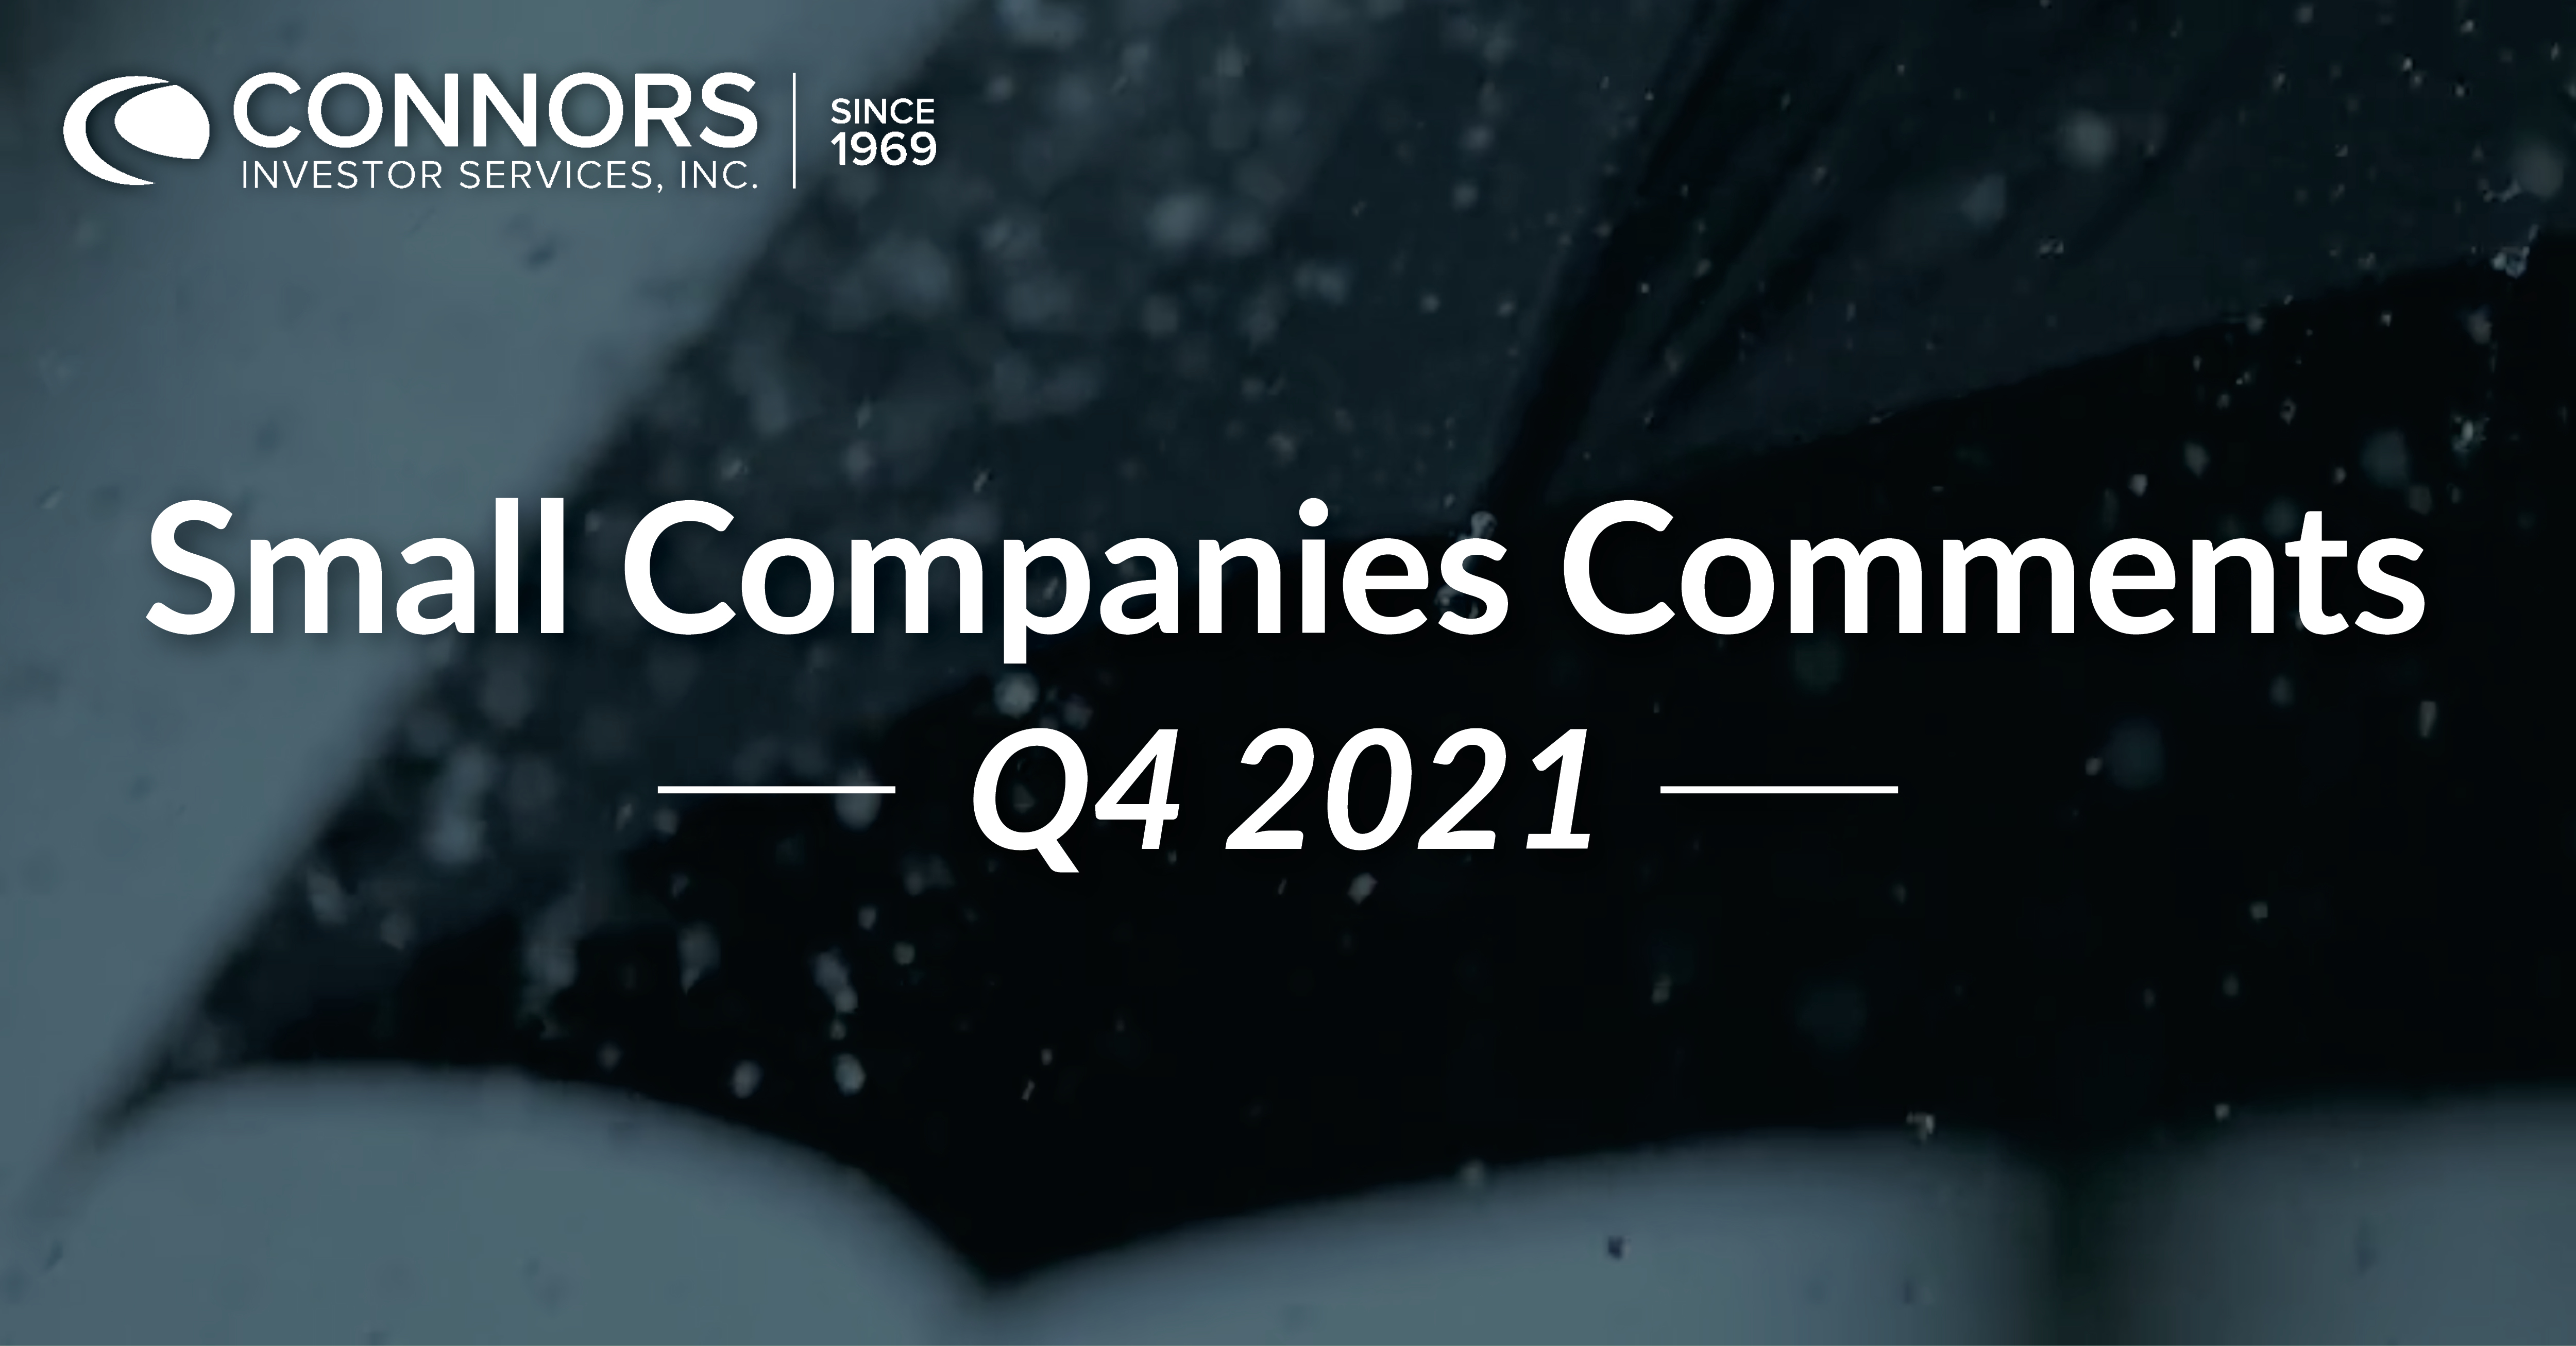 Q4 2021 Small Companies Comments